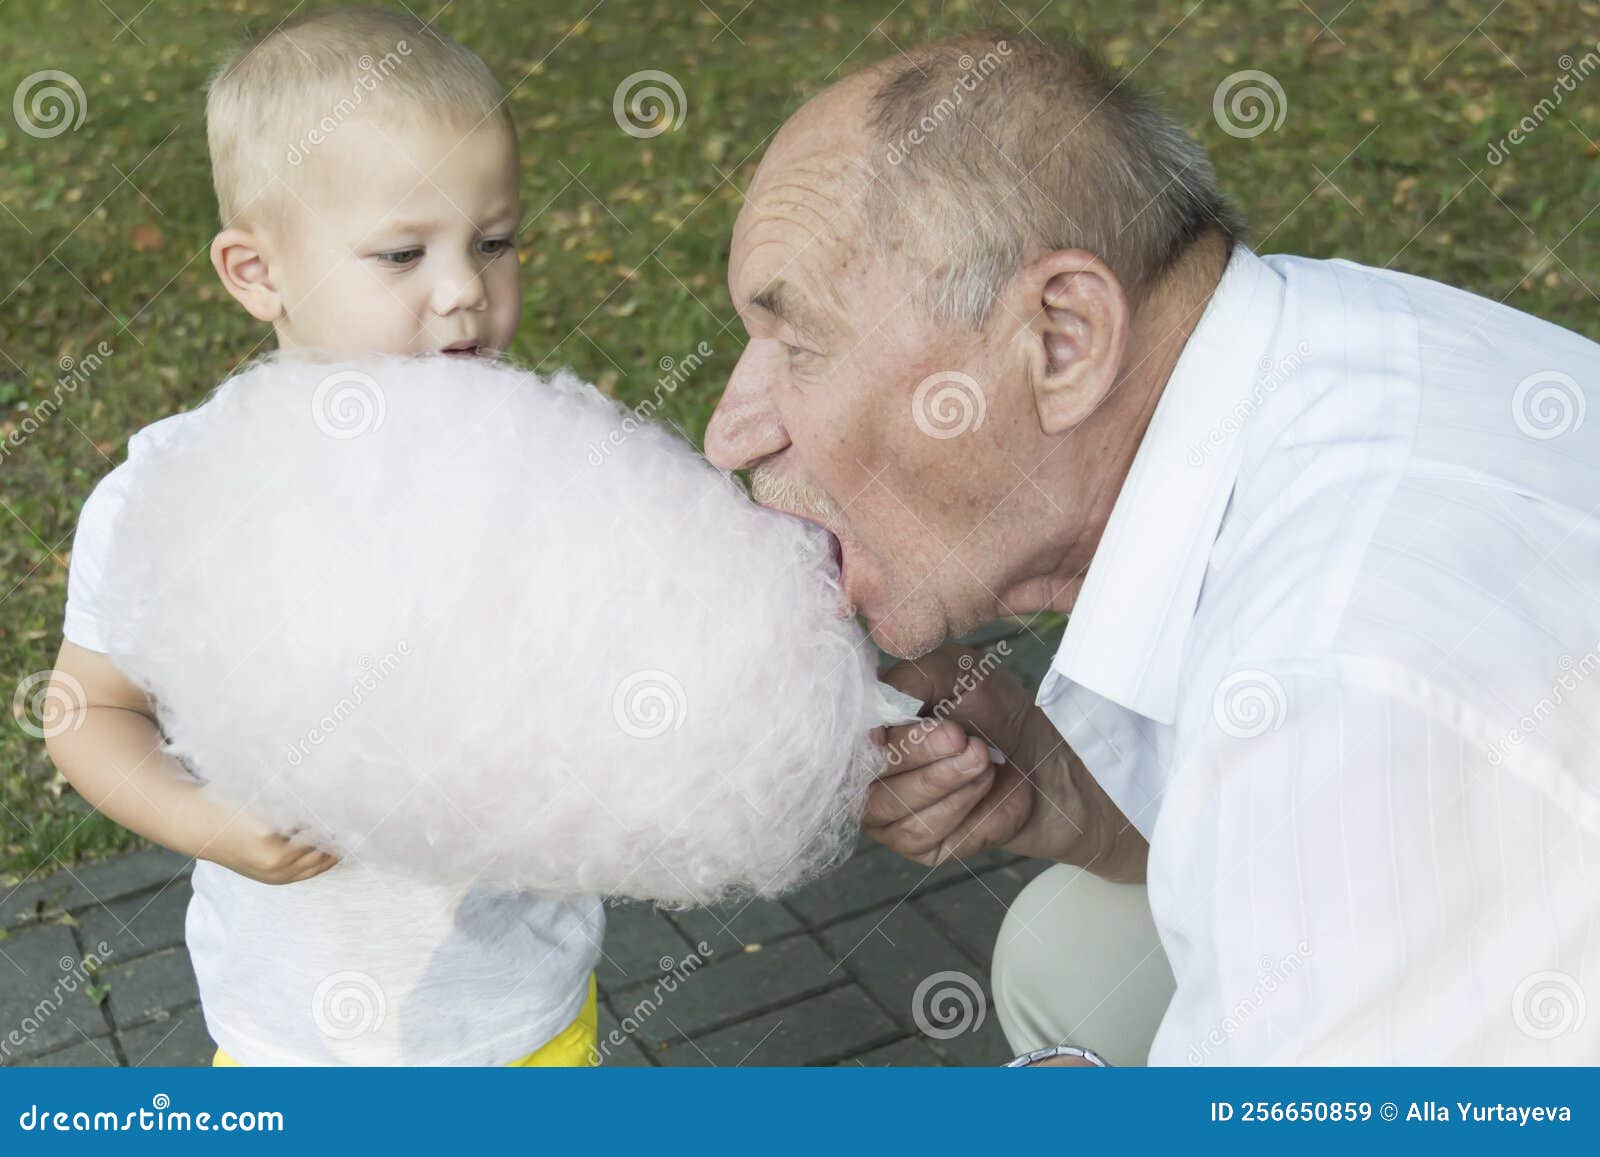 An Elderly Man With His Mouth Wide Open Greedily Bites Cotton Candy